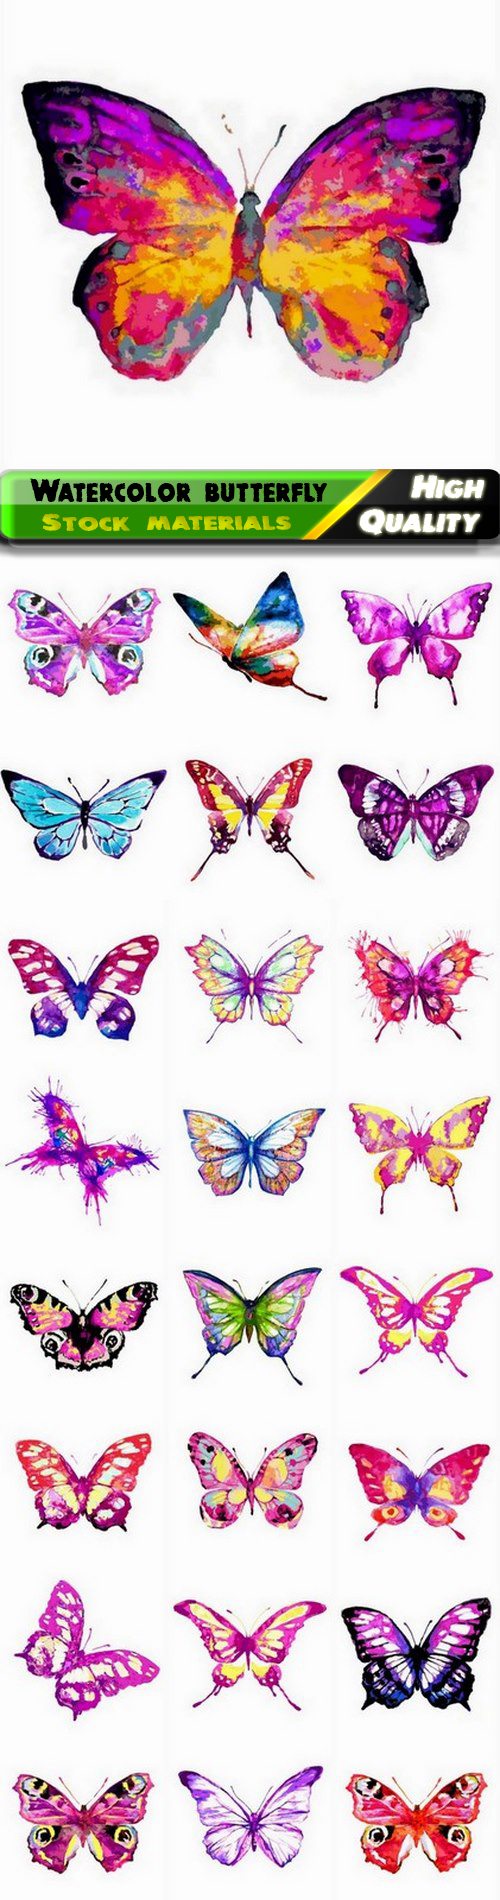 Cute illustration of watercolor art insect butterfly - 25 Eps